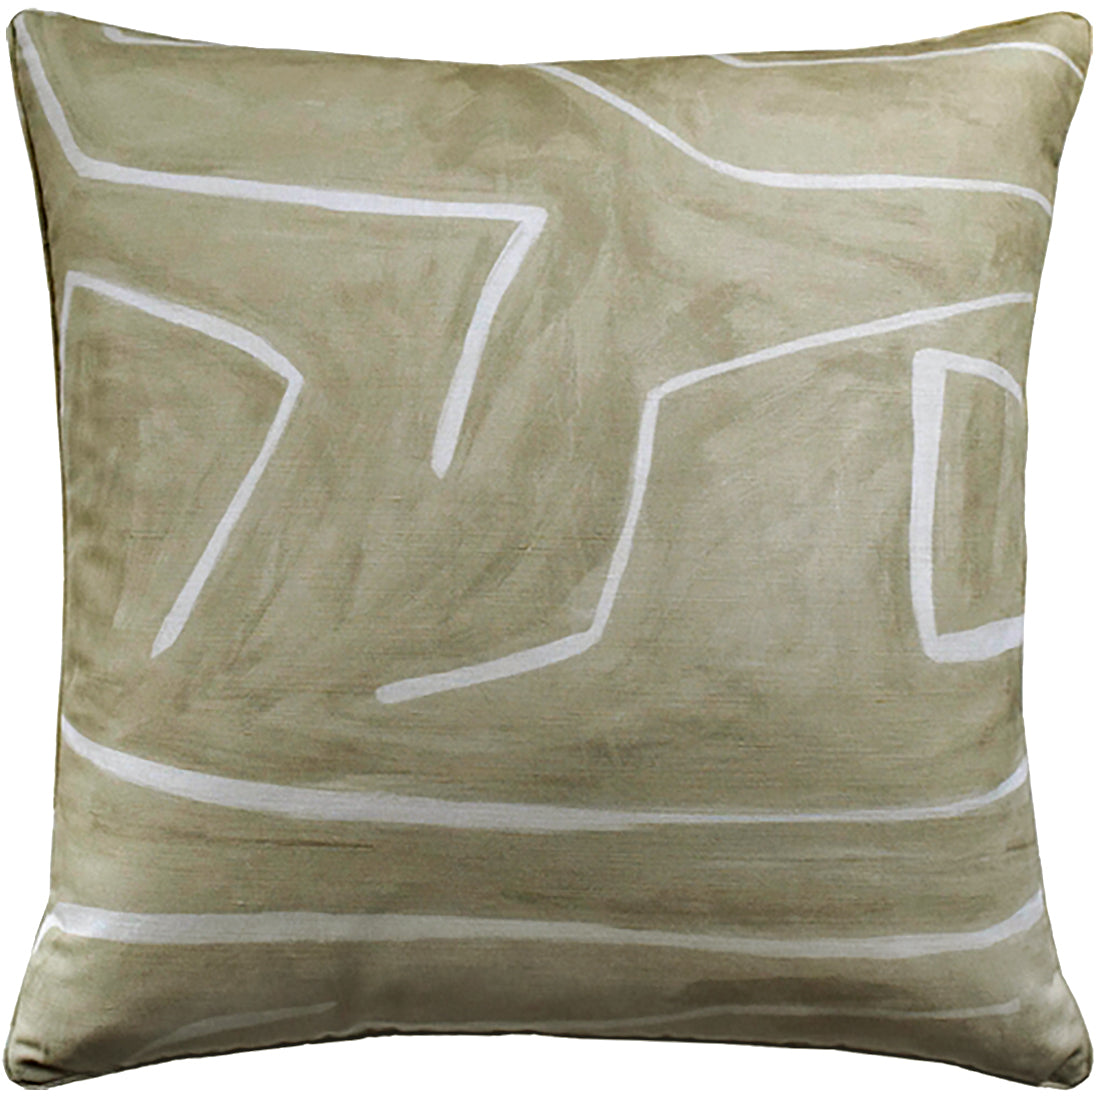 Graffito Pillow in Beige and Ivory